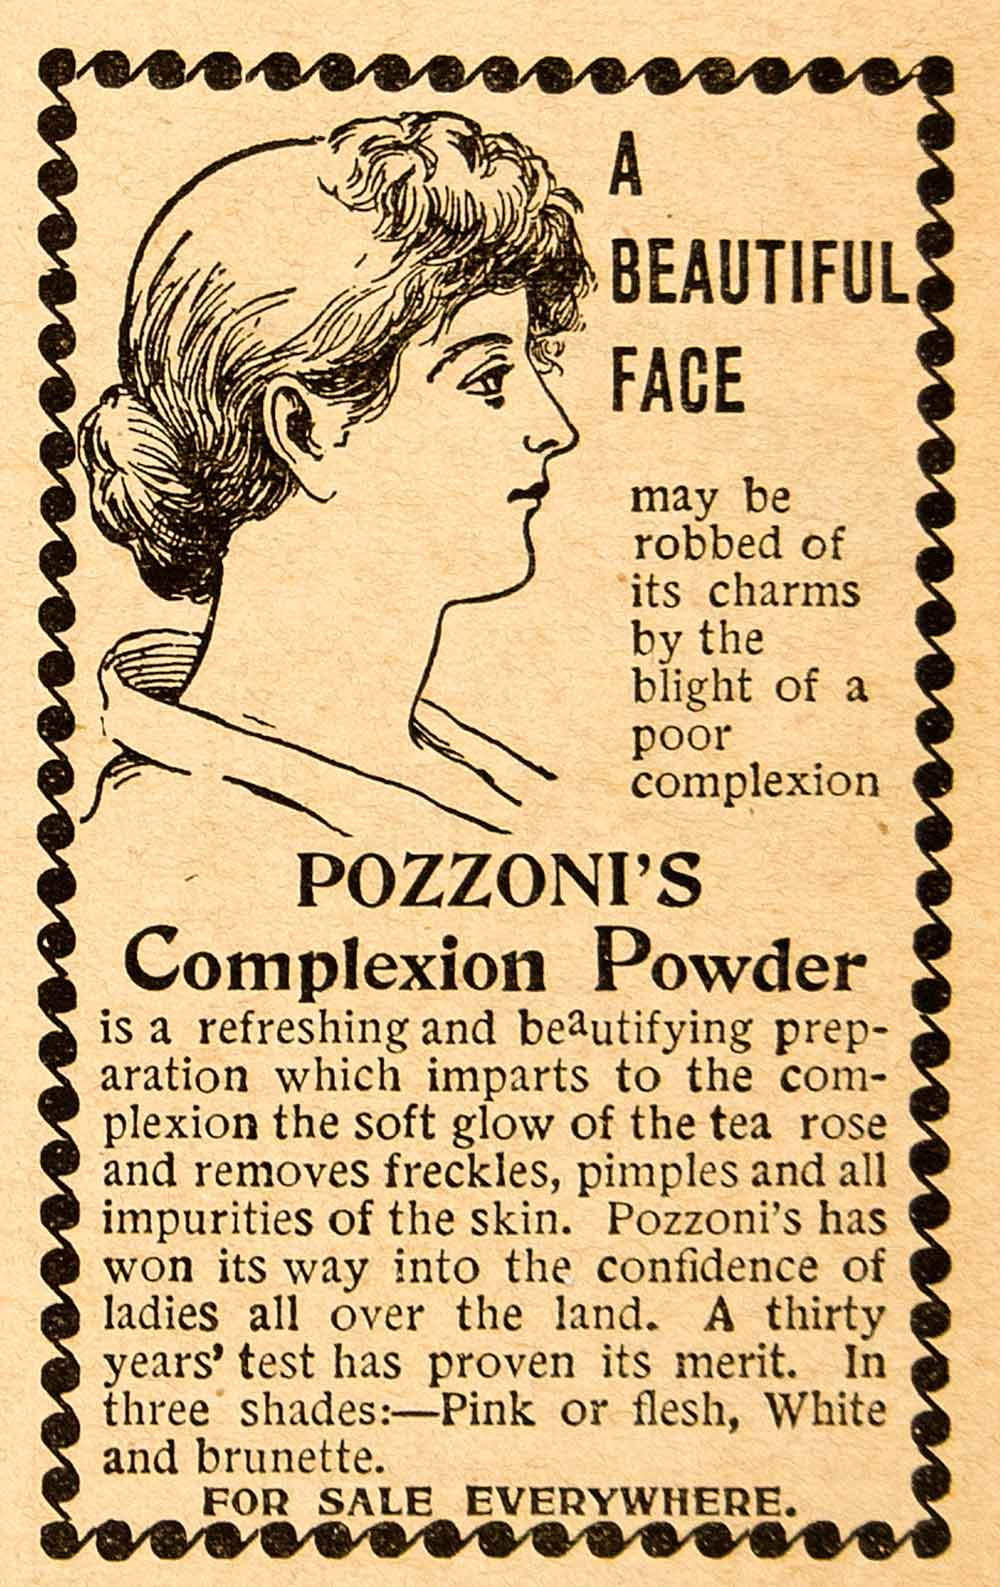 1894 Ad Pozzonis Complexion Powder Victorian Women Health Beauty Skin Face YDL7